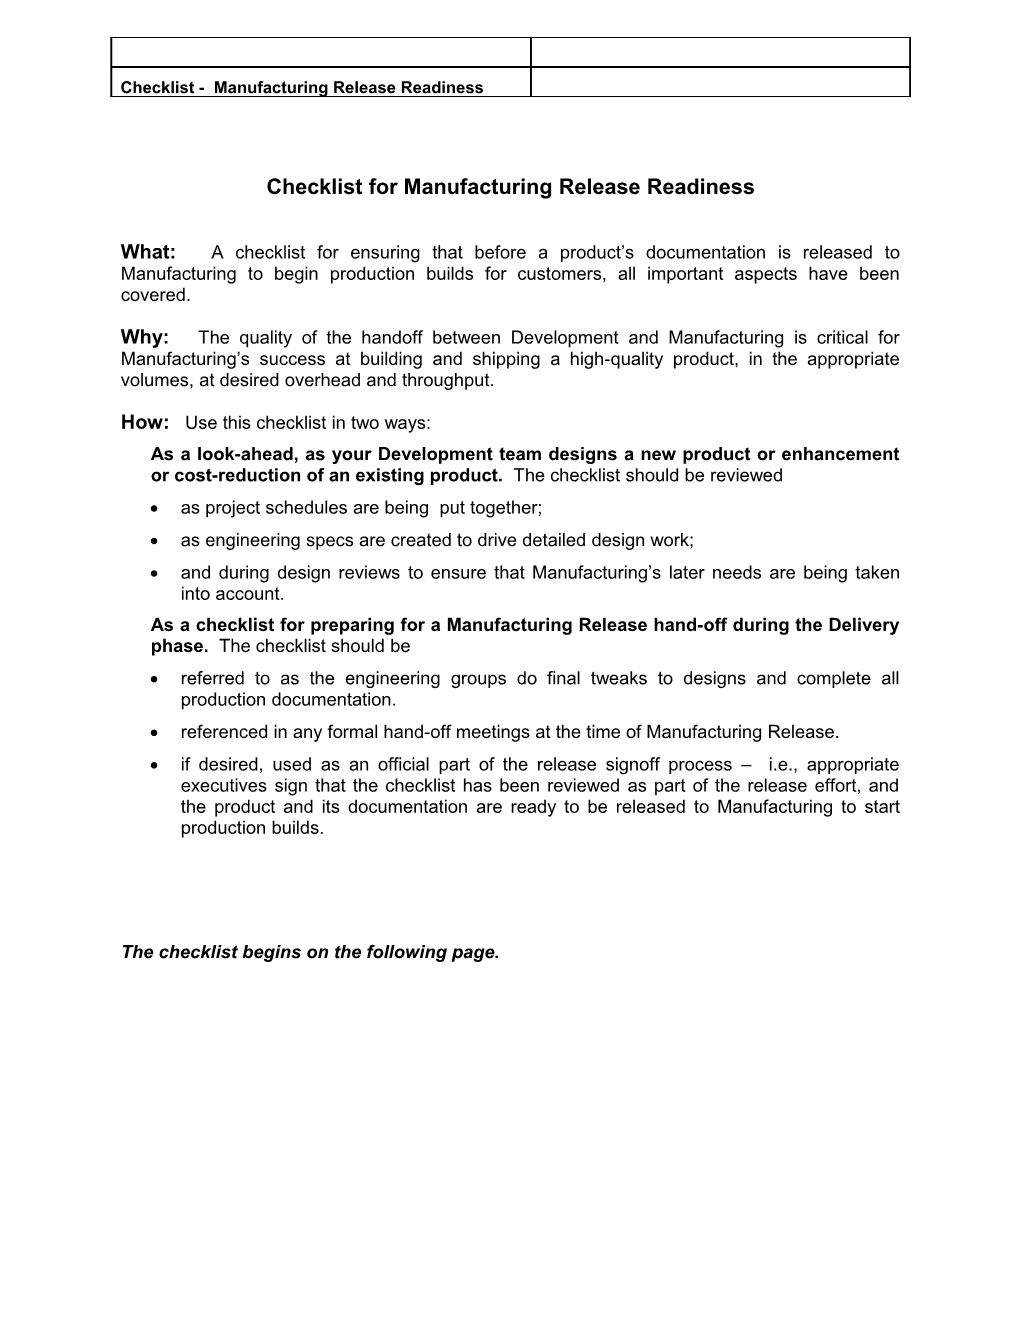 Guideline for Mfg Release Readiness